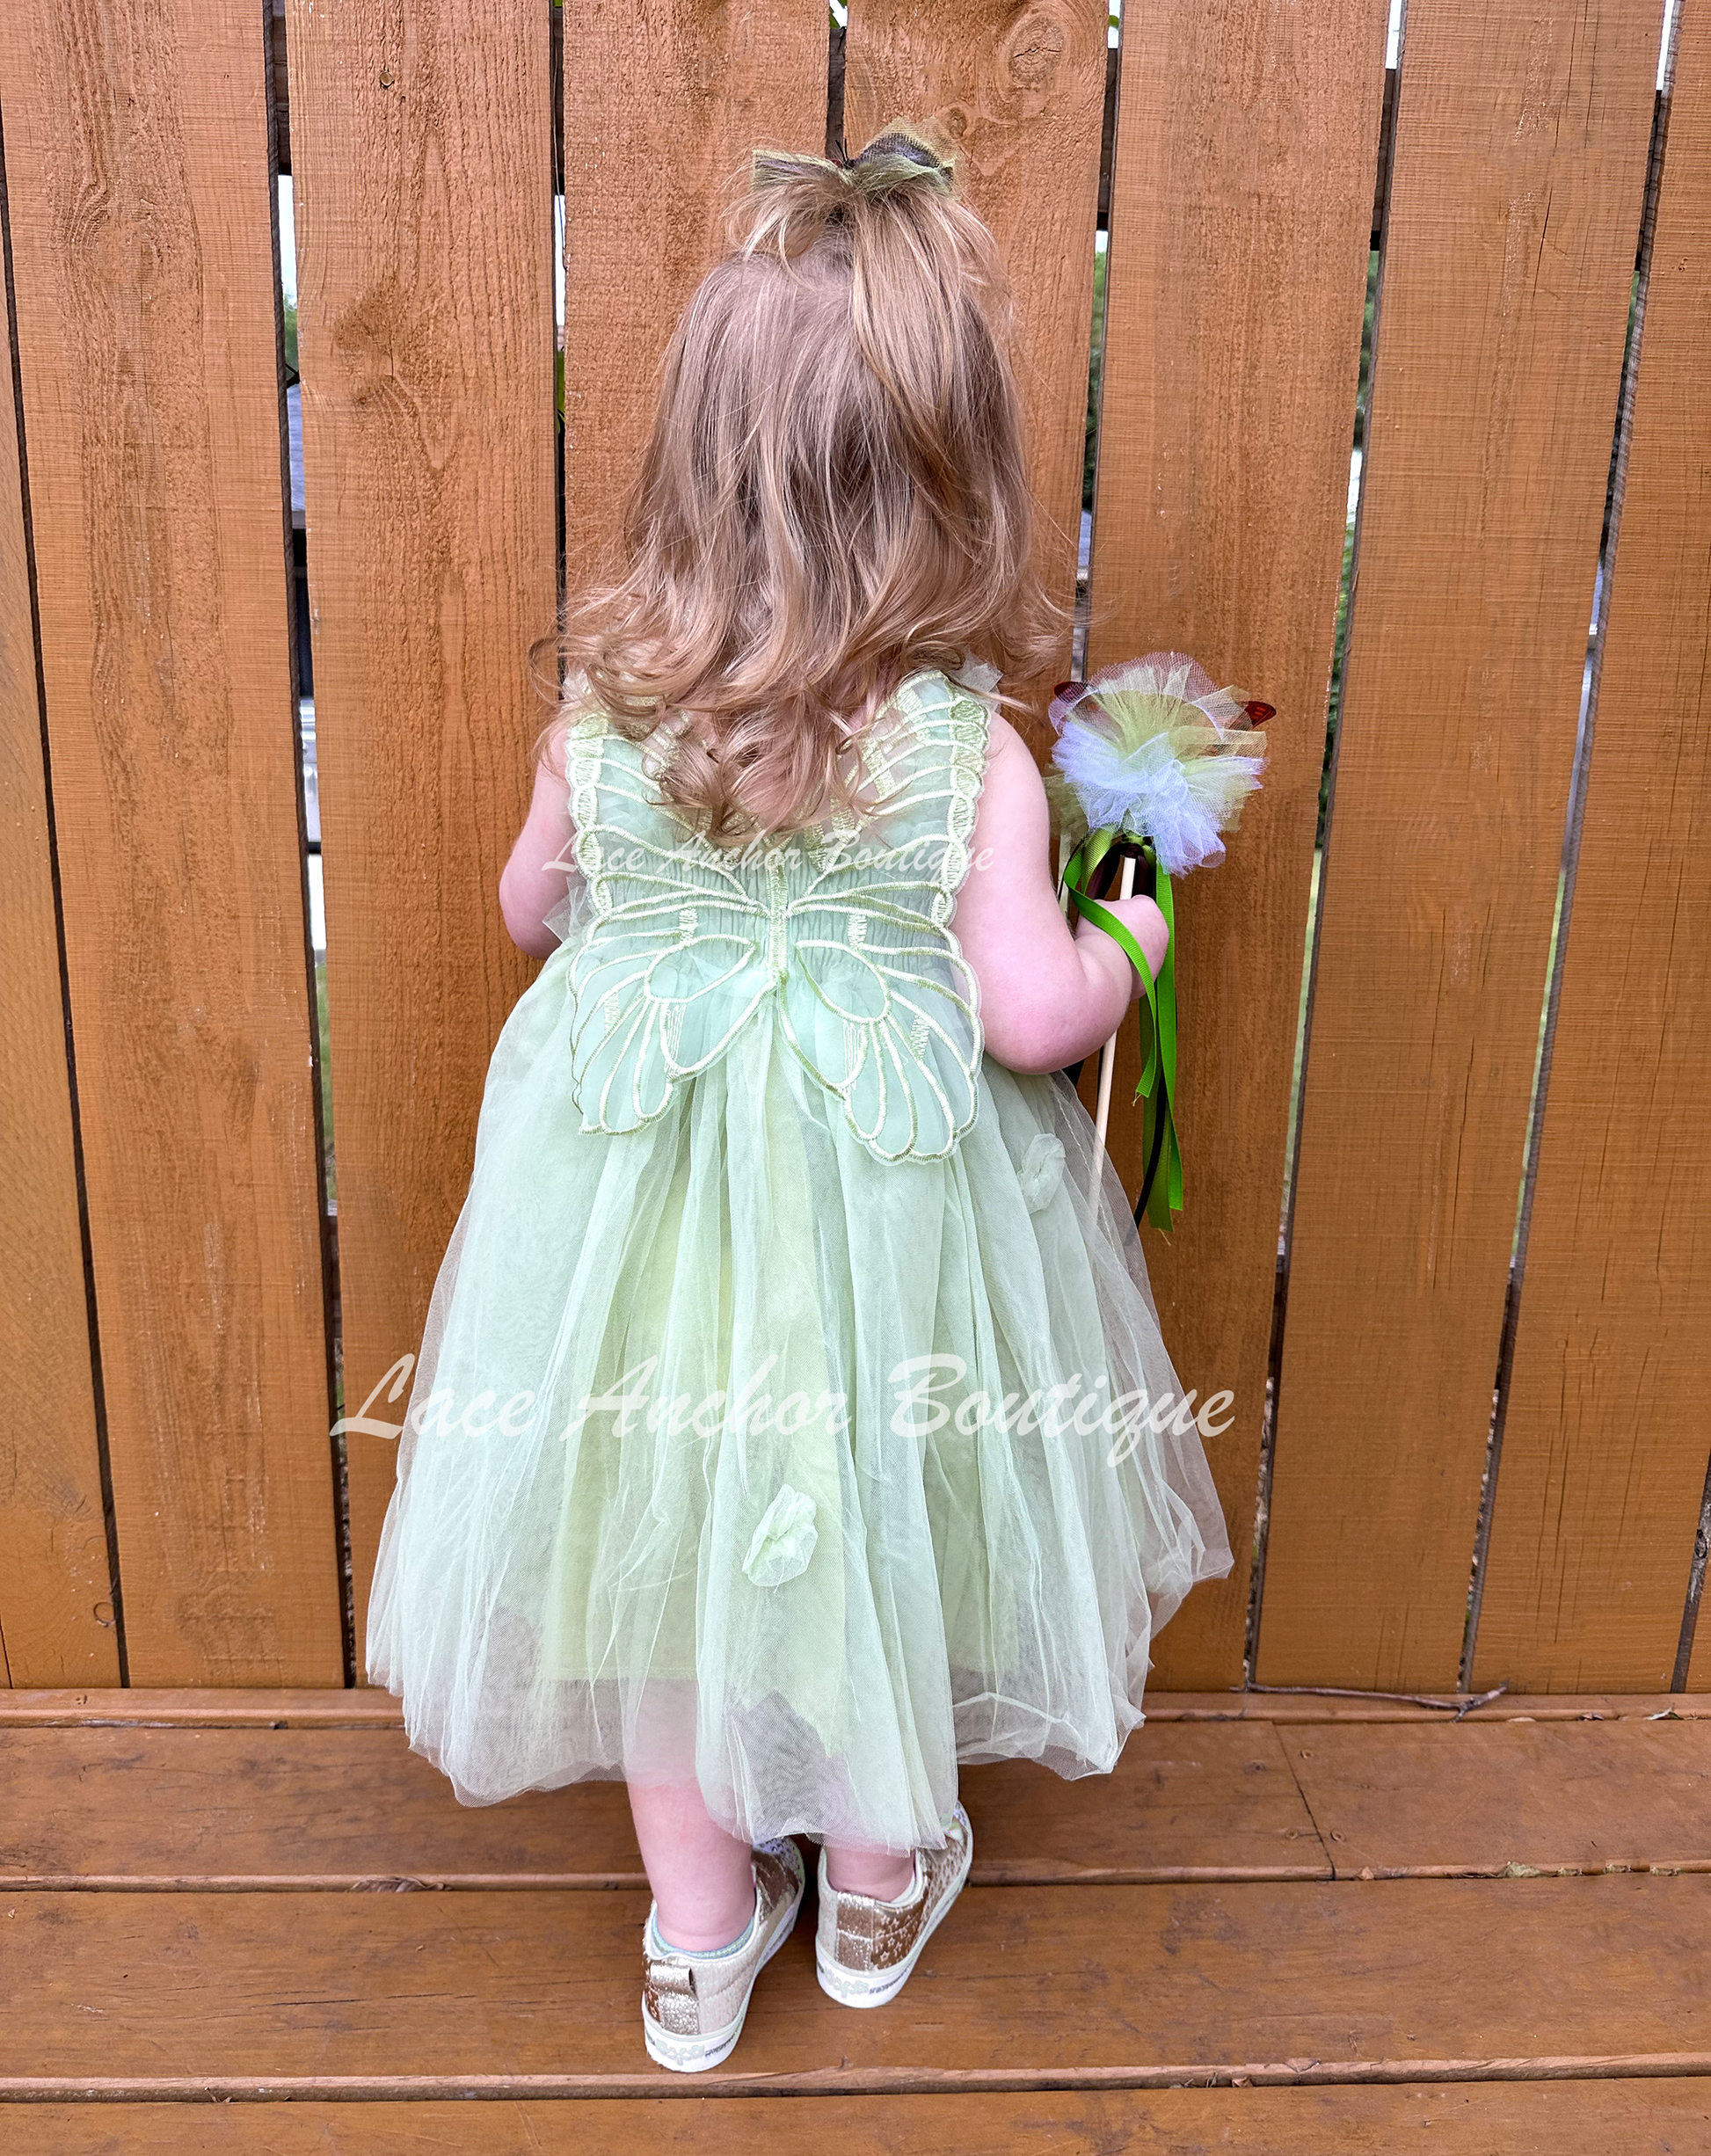 Sage Green tulle fairy girls dress with smocked top and tulle flowers on skirt. Attached butterfly wings and ruffled straps. Worn by toddler model.